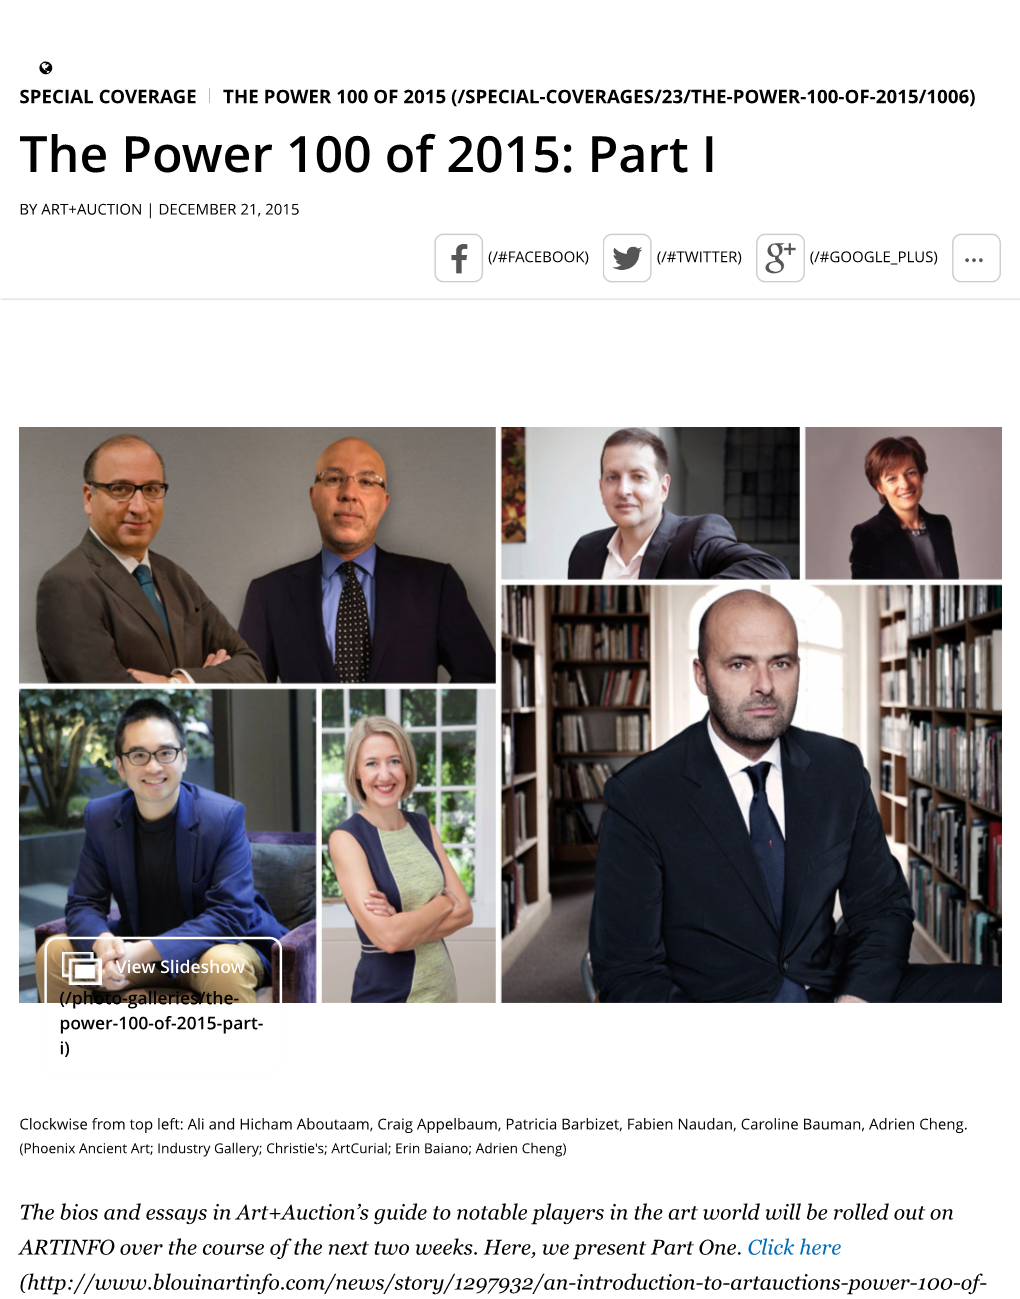 The Power 100 of 2015: Part I